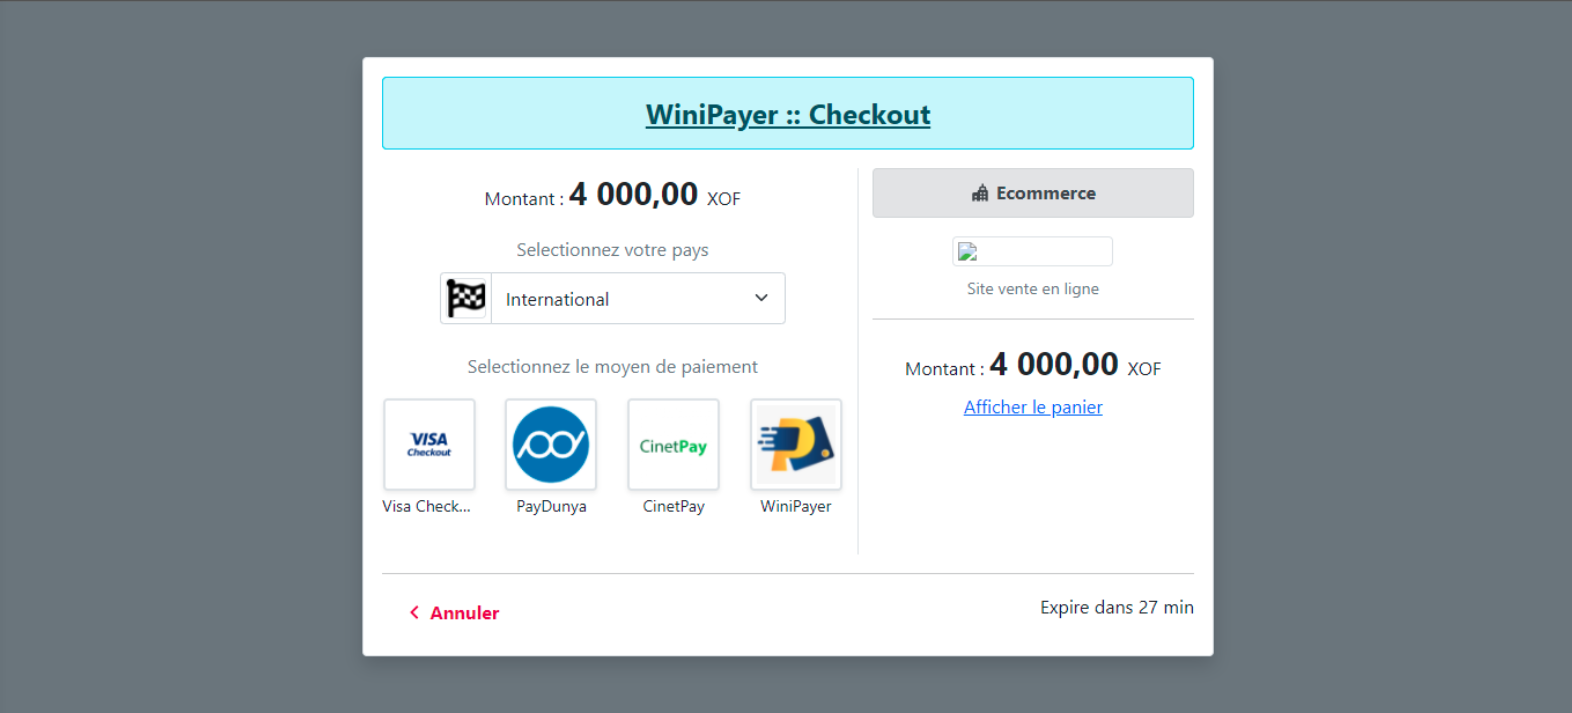 winipayer-page-payment